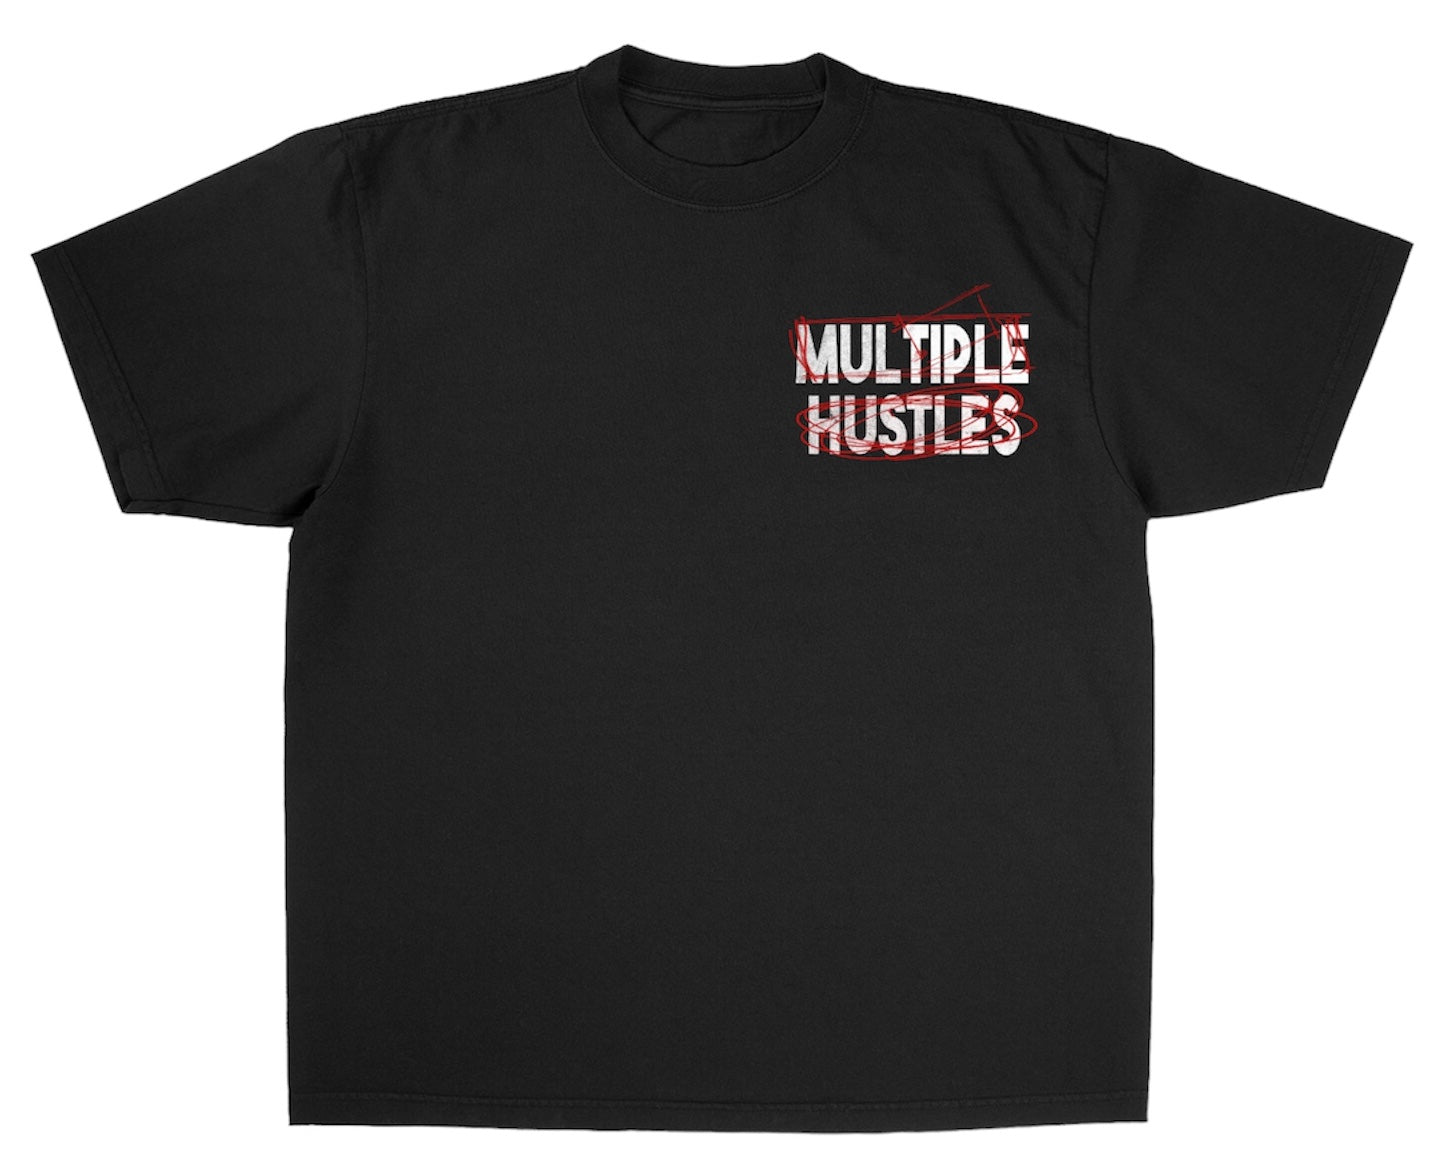 The Hustle Hard Collection Black T-Shirt